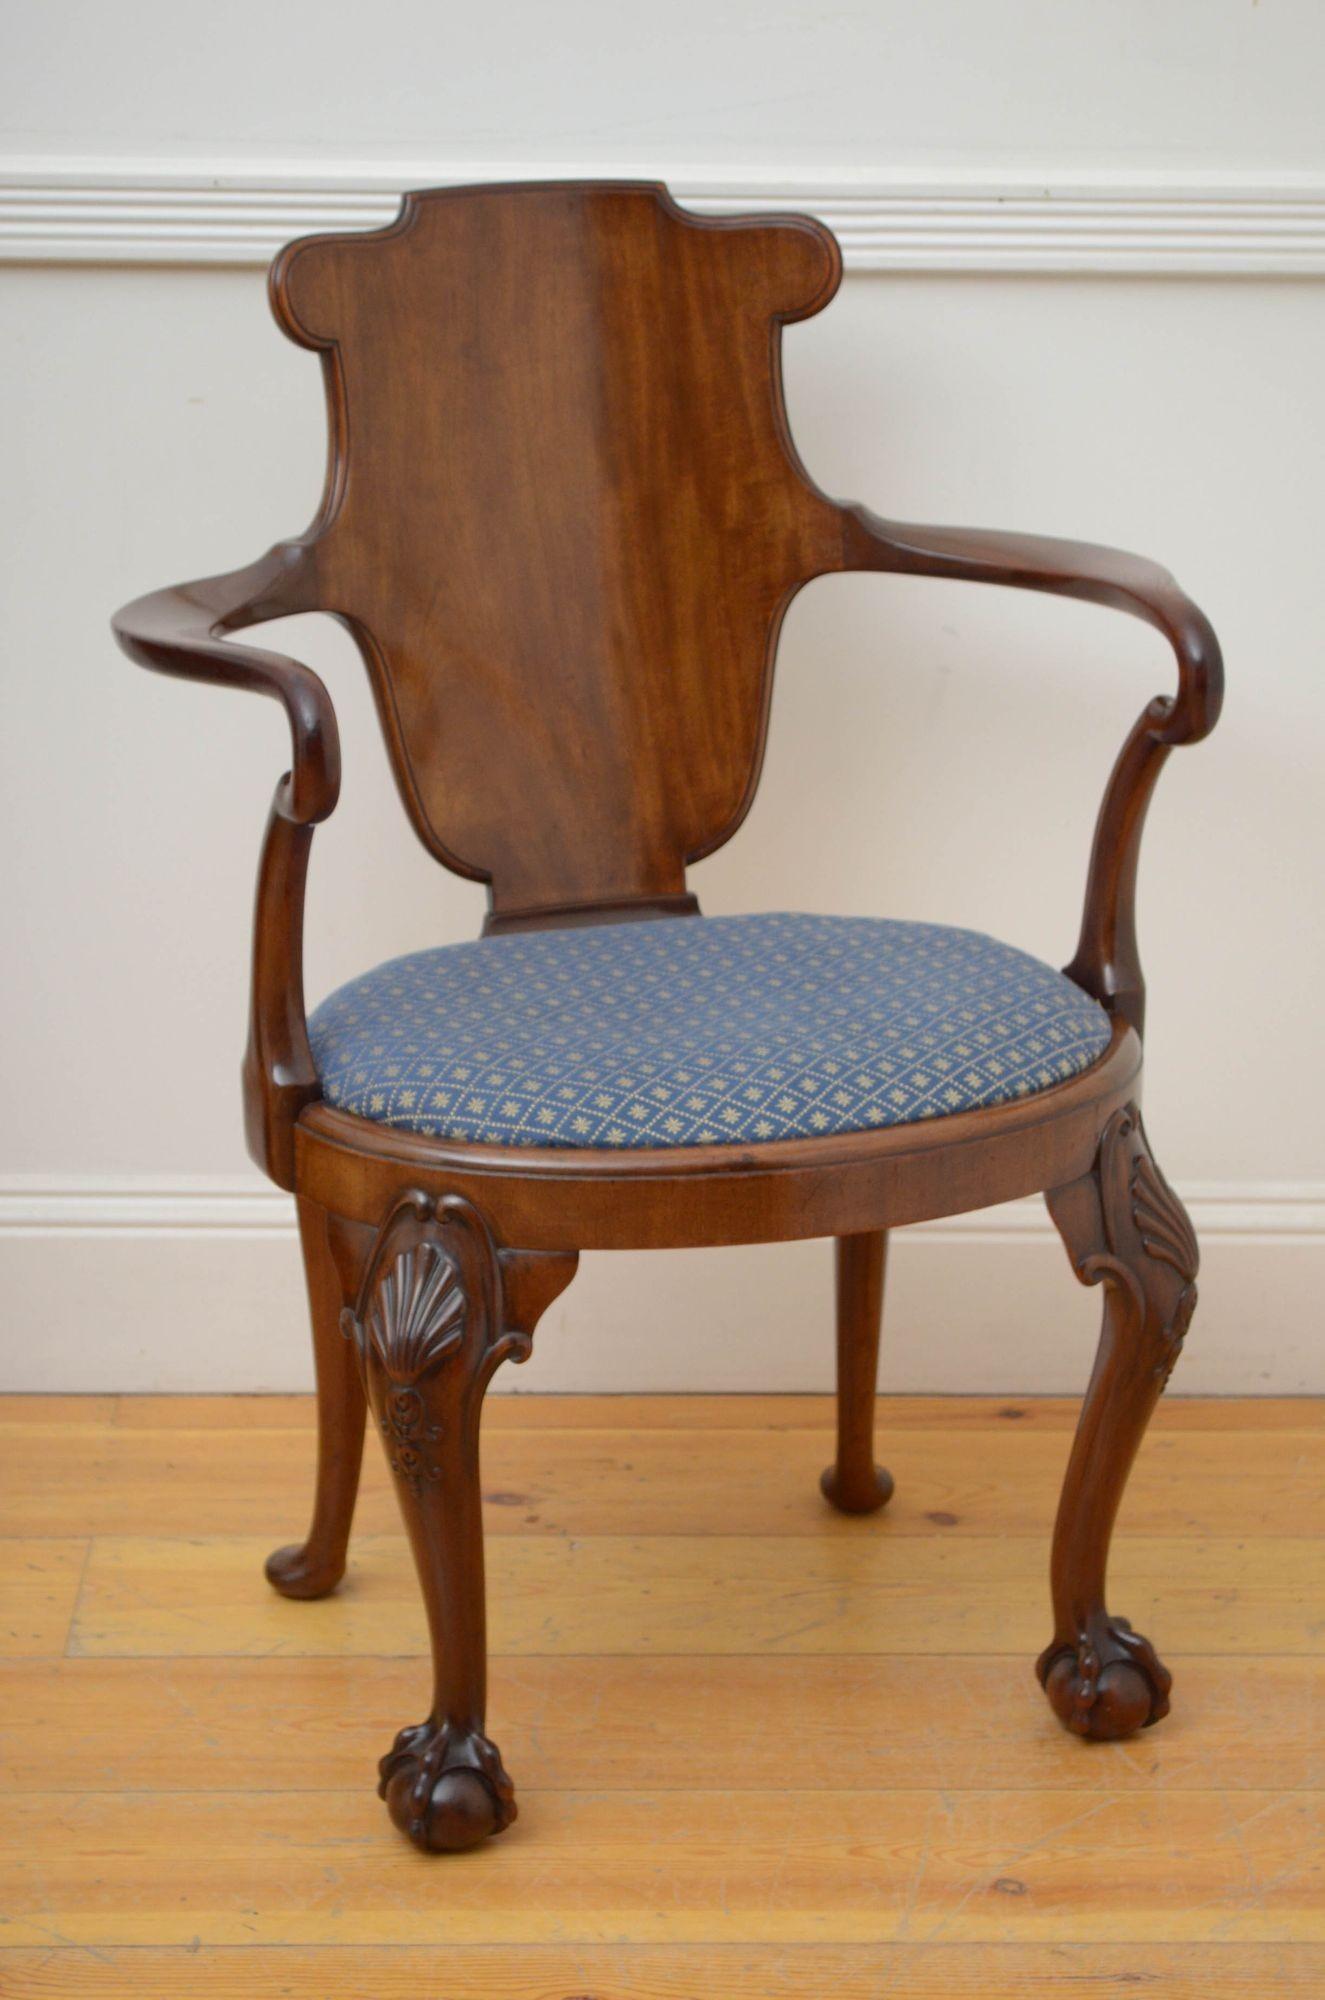 Early 20th century Gillows Design Chair in Mahogany In Good Condition For Sale In Whaley Bridge, GB